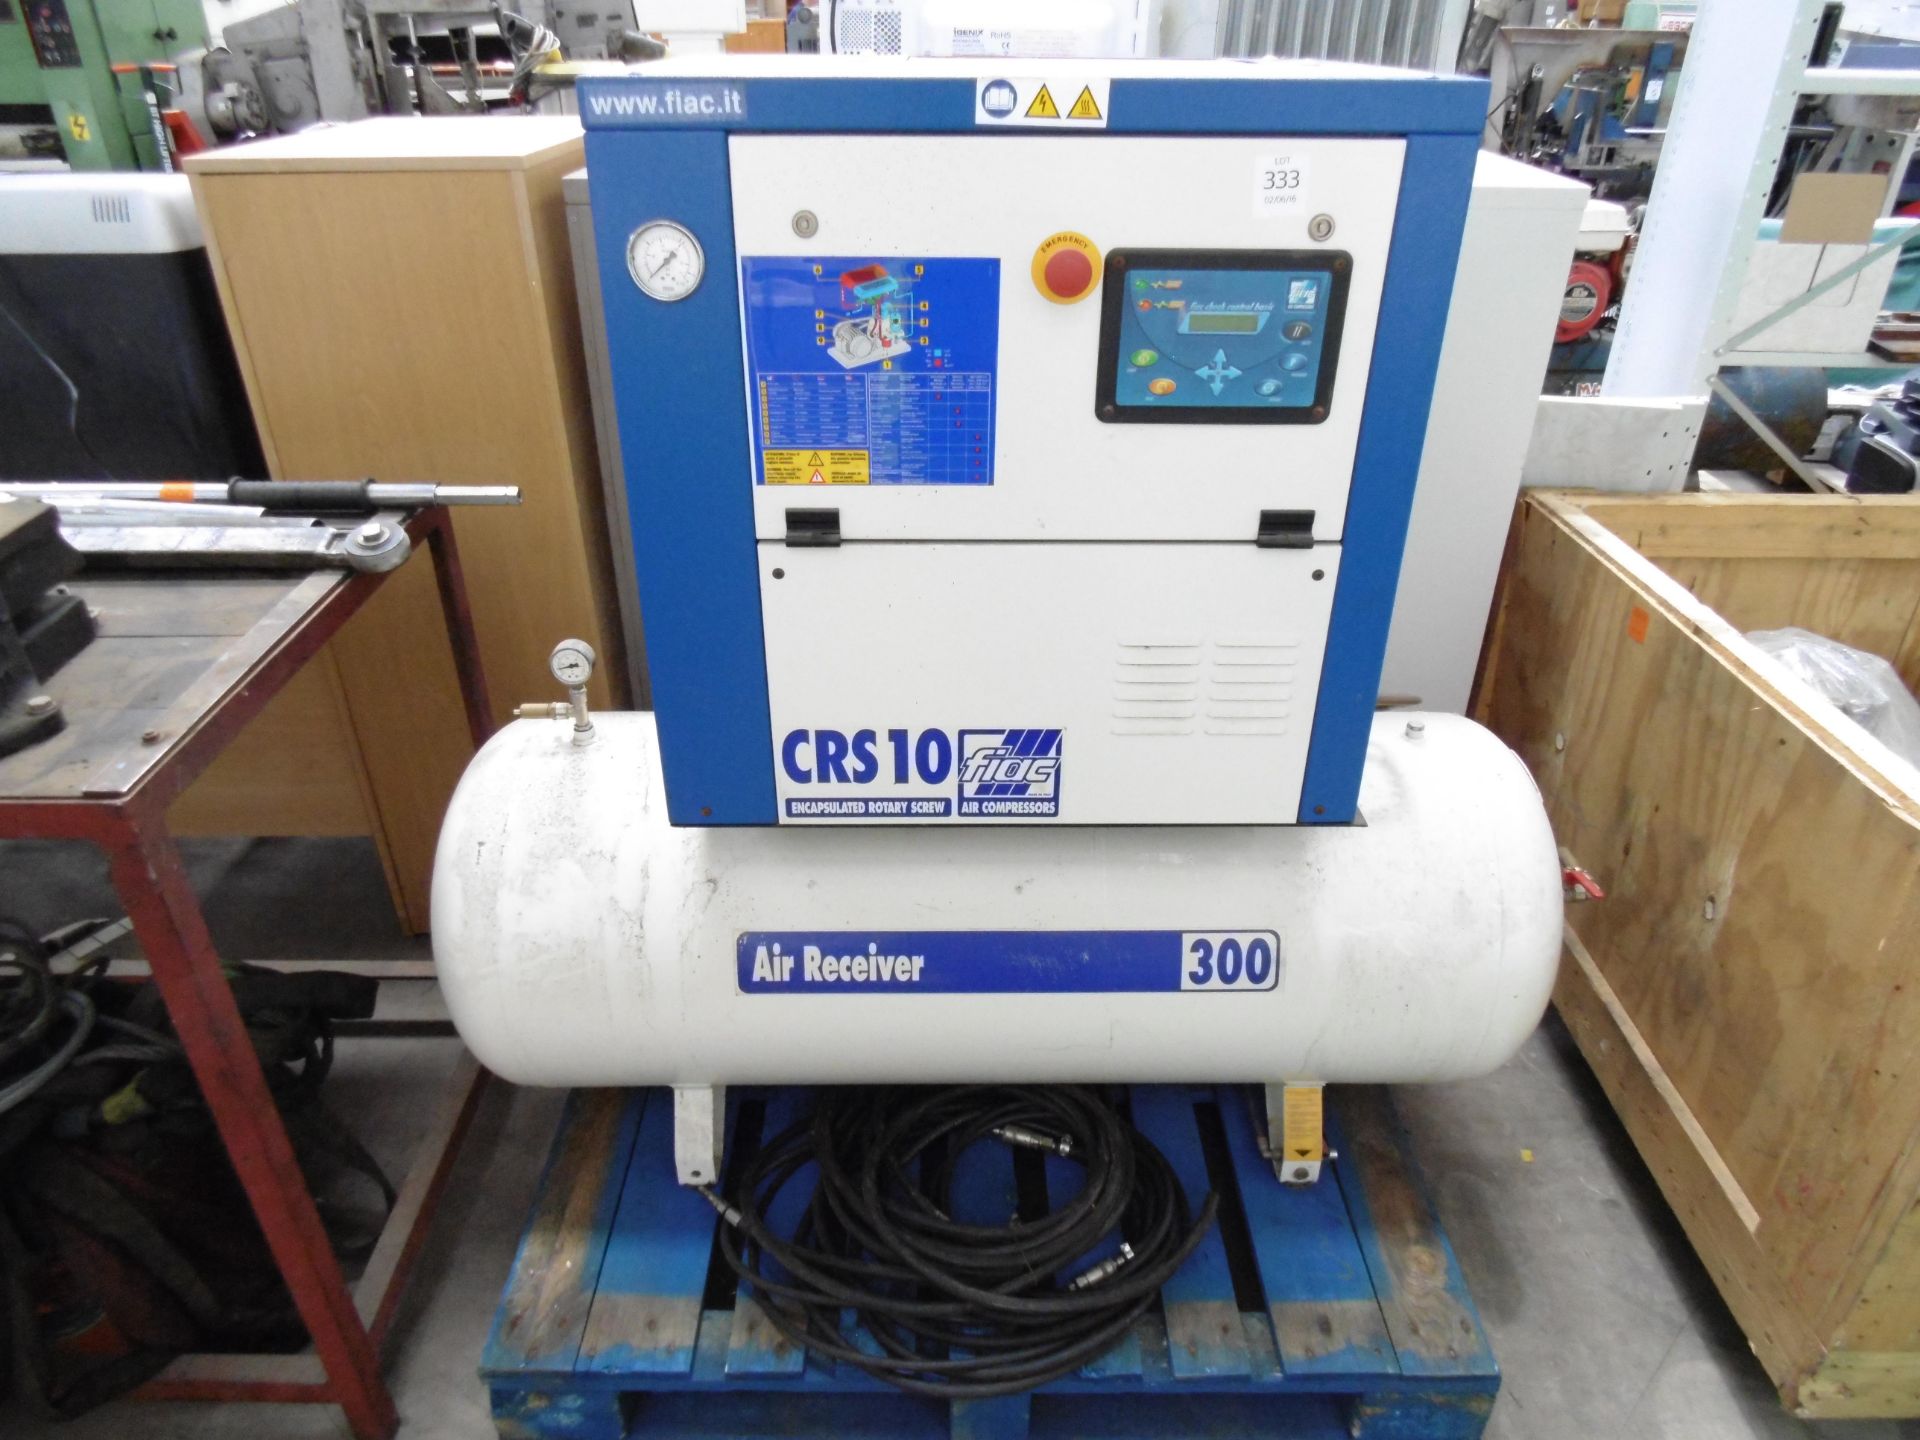 * A CRS 10 encapsulated rotary screw compressor, 300ltr, 3 phase. Please note there is a £10 + VAT